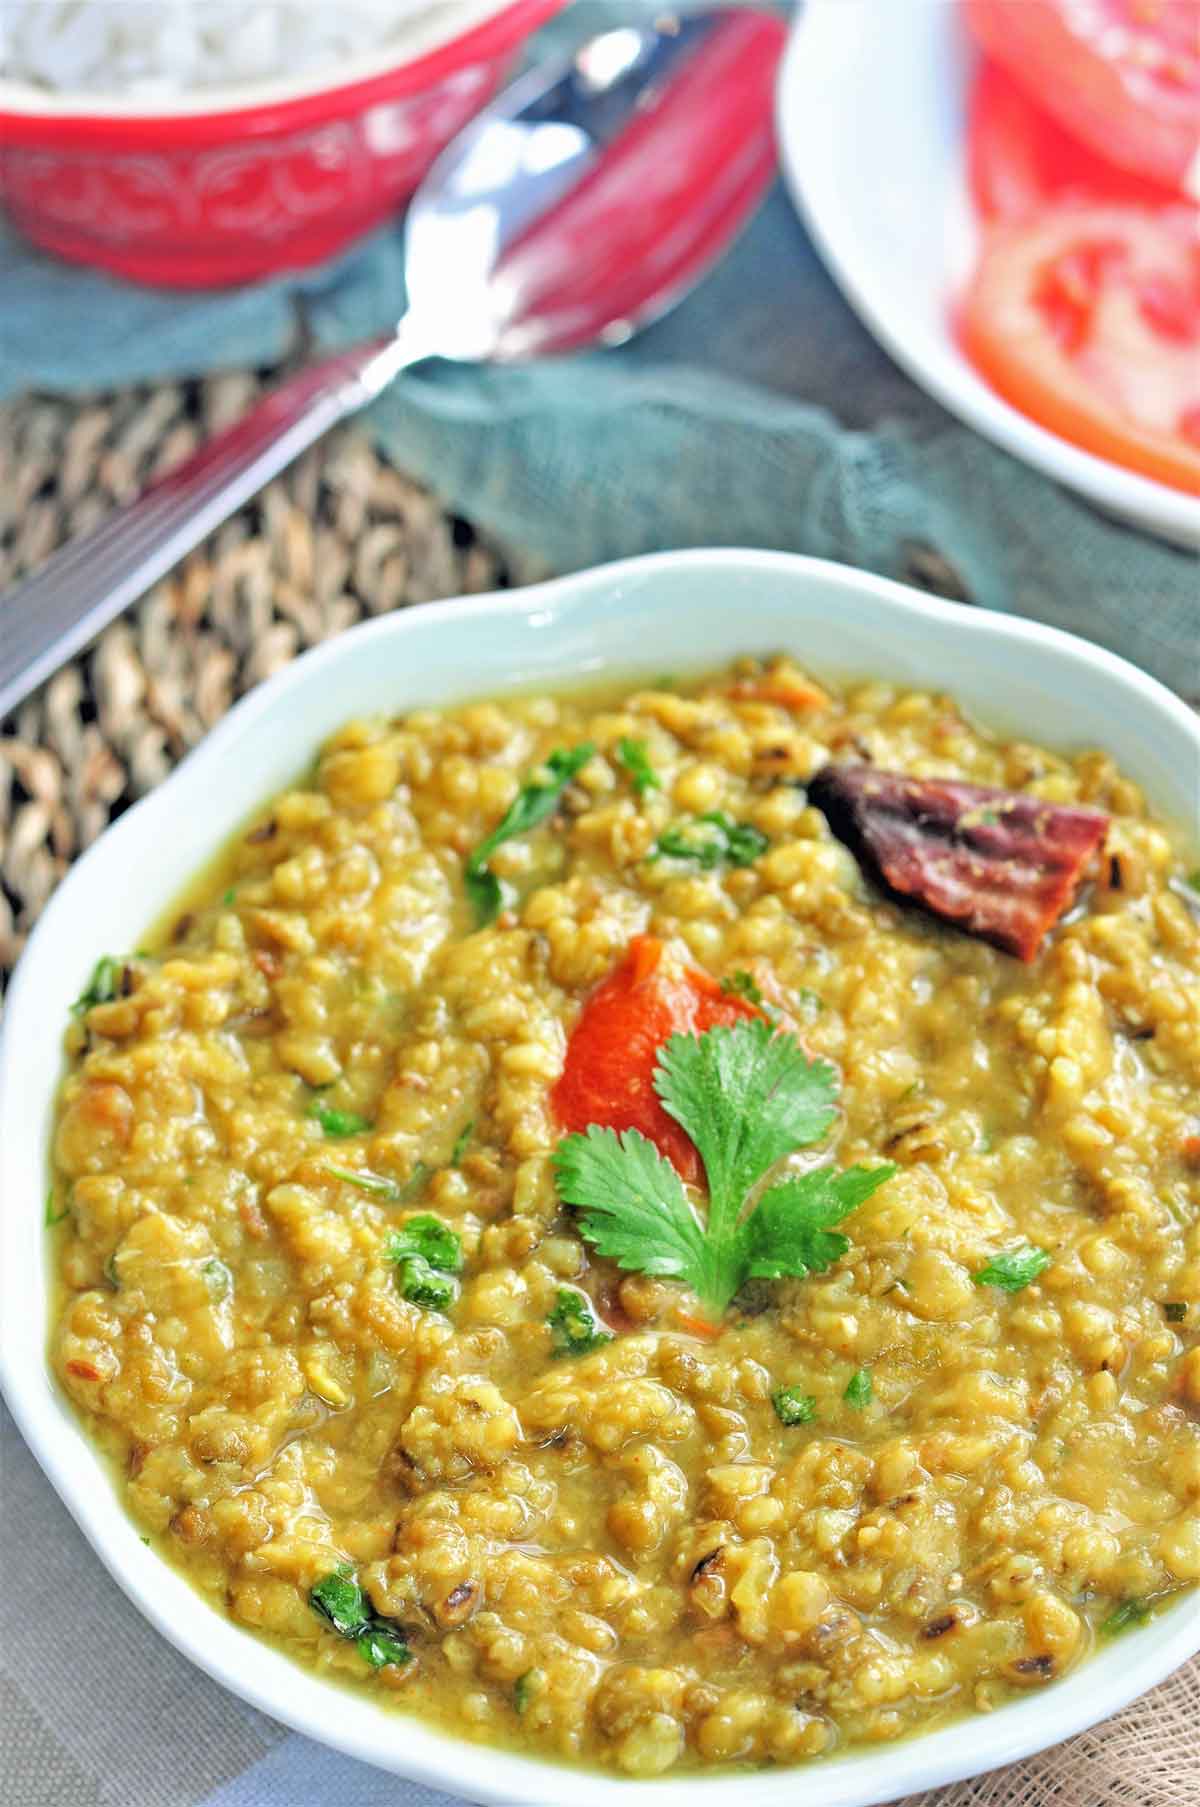 Green moong dal served in a bowl, garnished with cilantro leaves.